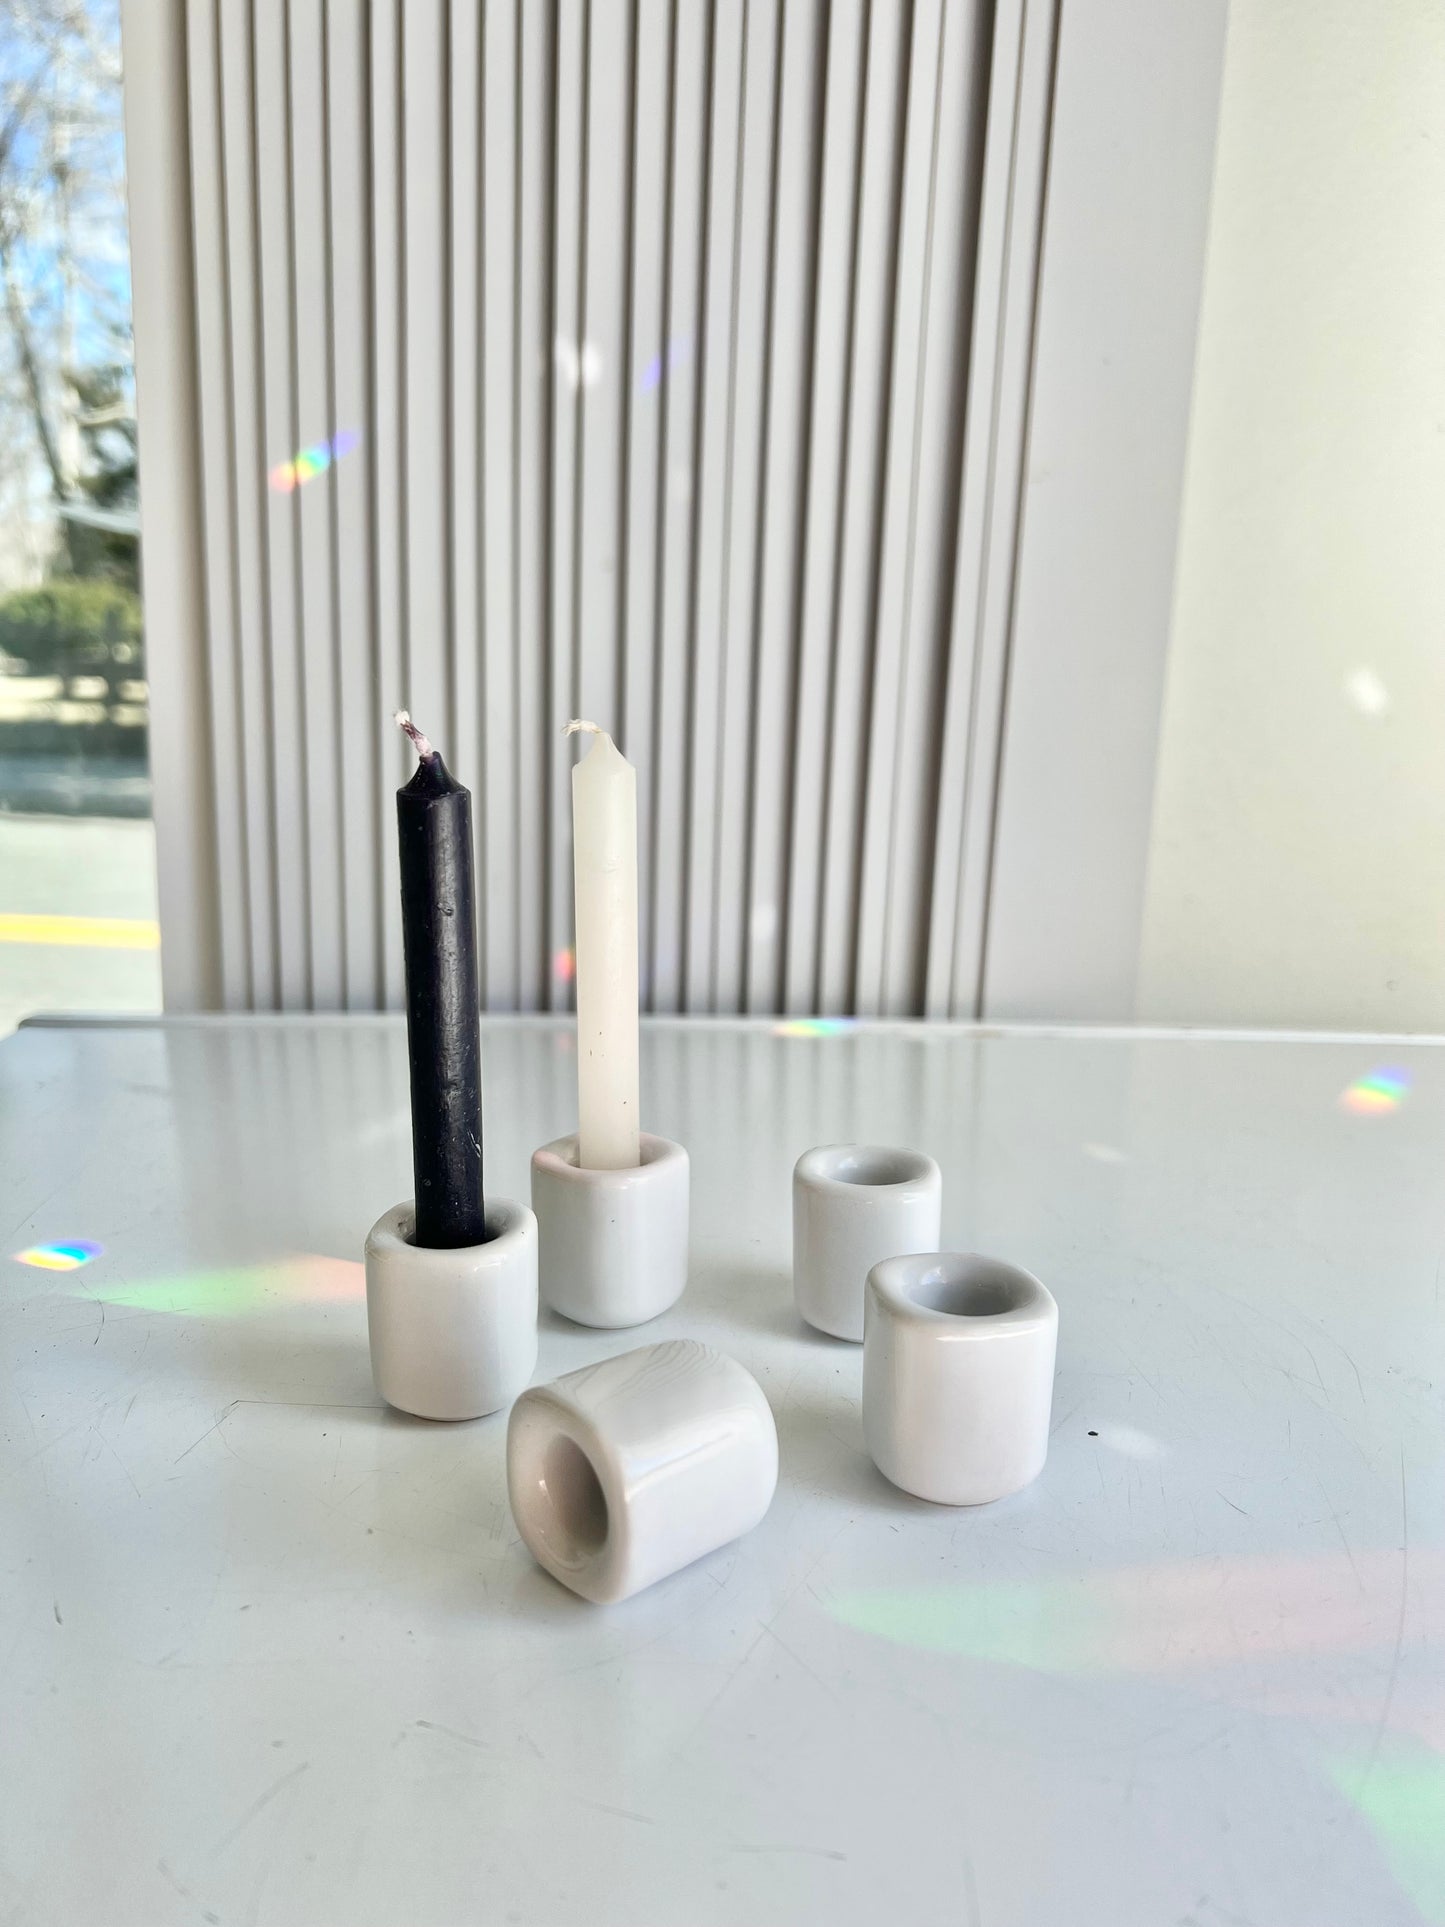 B+W “CHIME” SPELL CANDLES